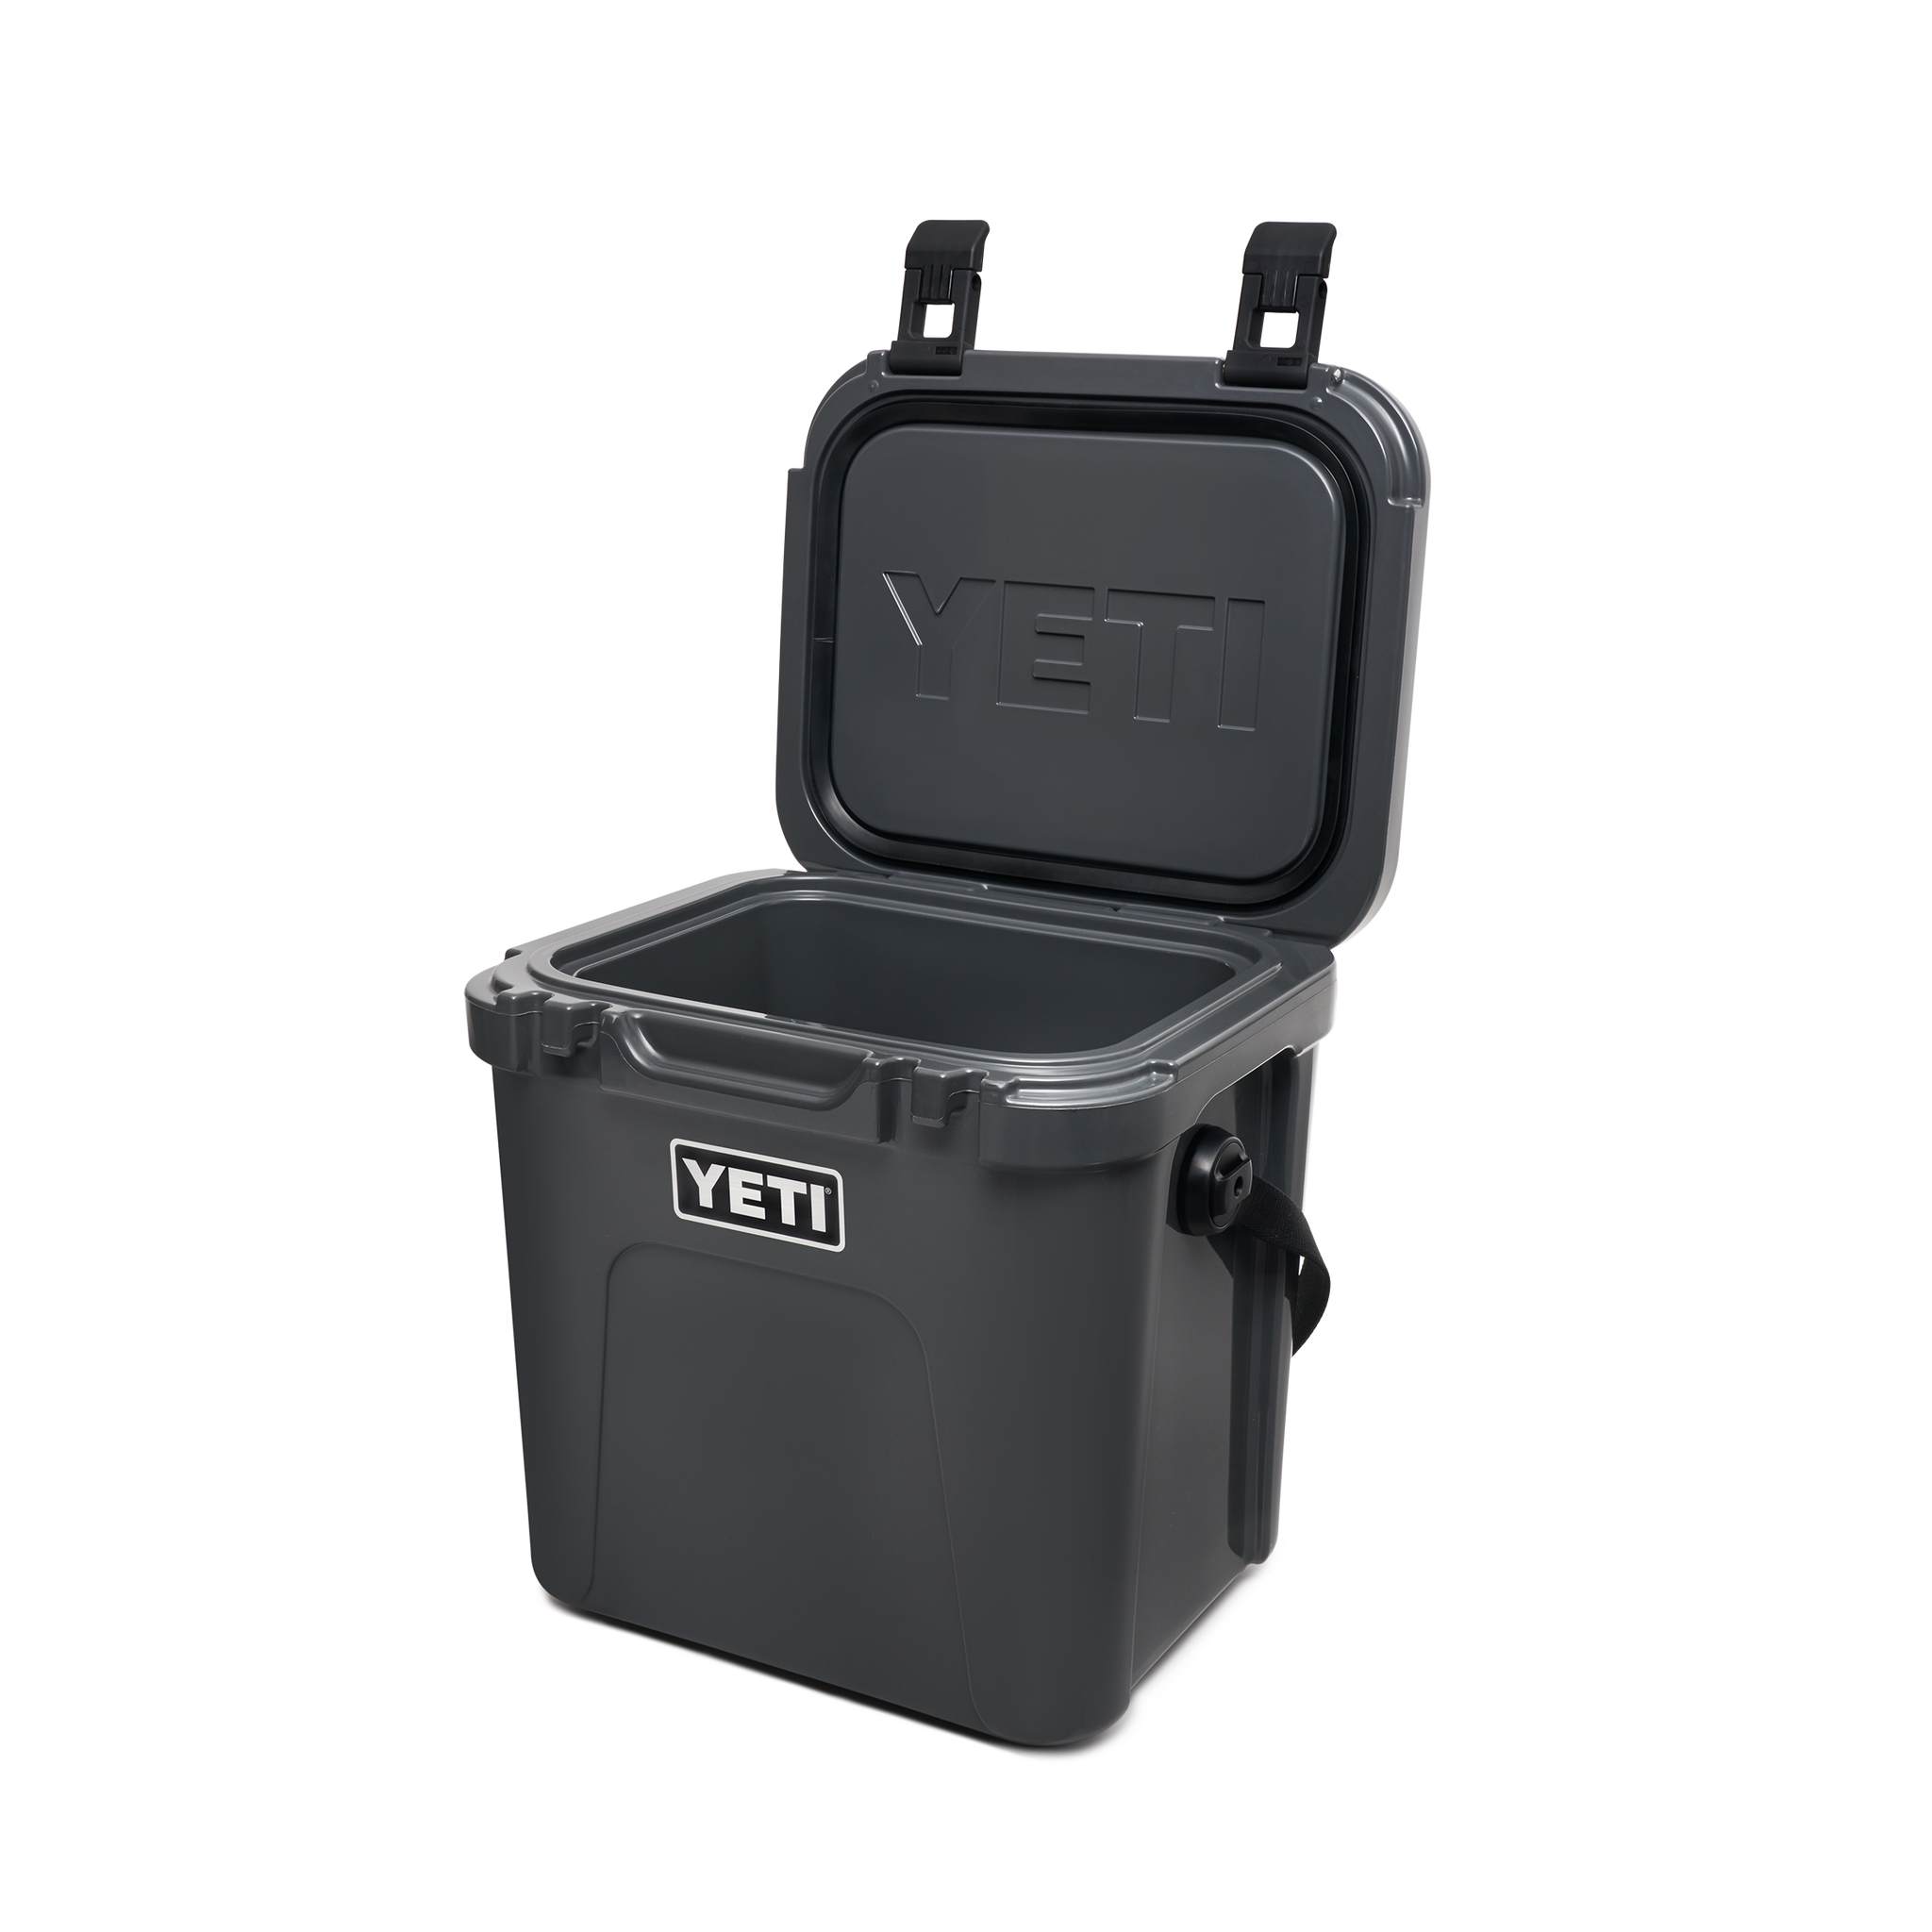 Yeti Coolers & Accessories for Father's Day - Pack and Paddle